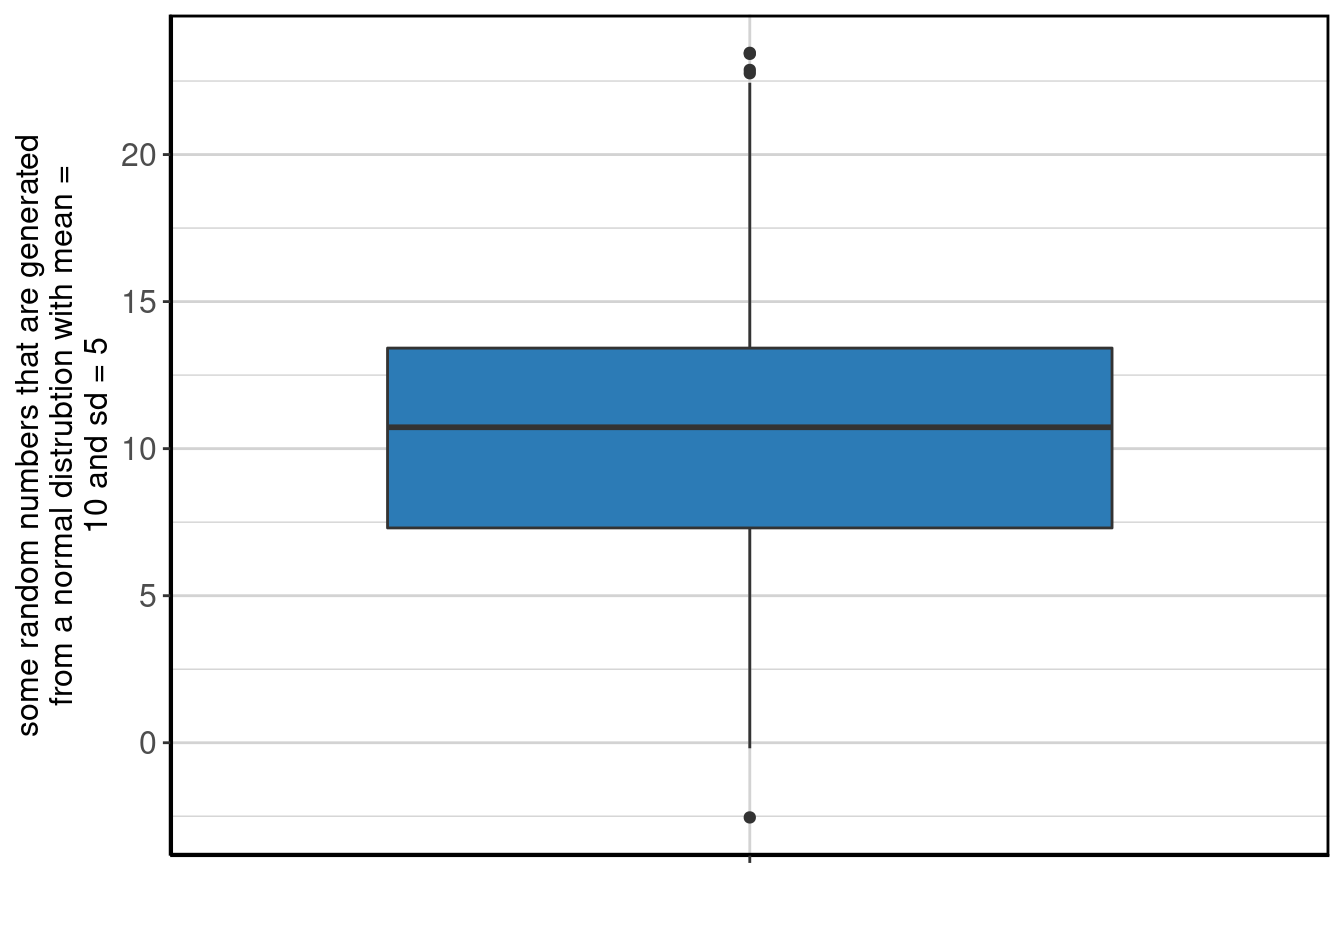 Boxplot of <b>some random numbers that are generated from a normal distrubtion with mean = 10 and sd = 5</b>.